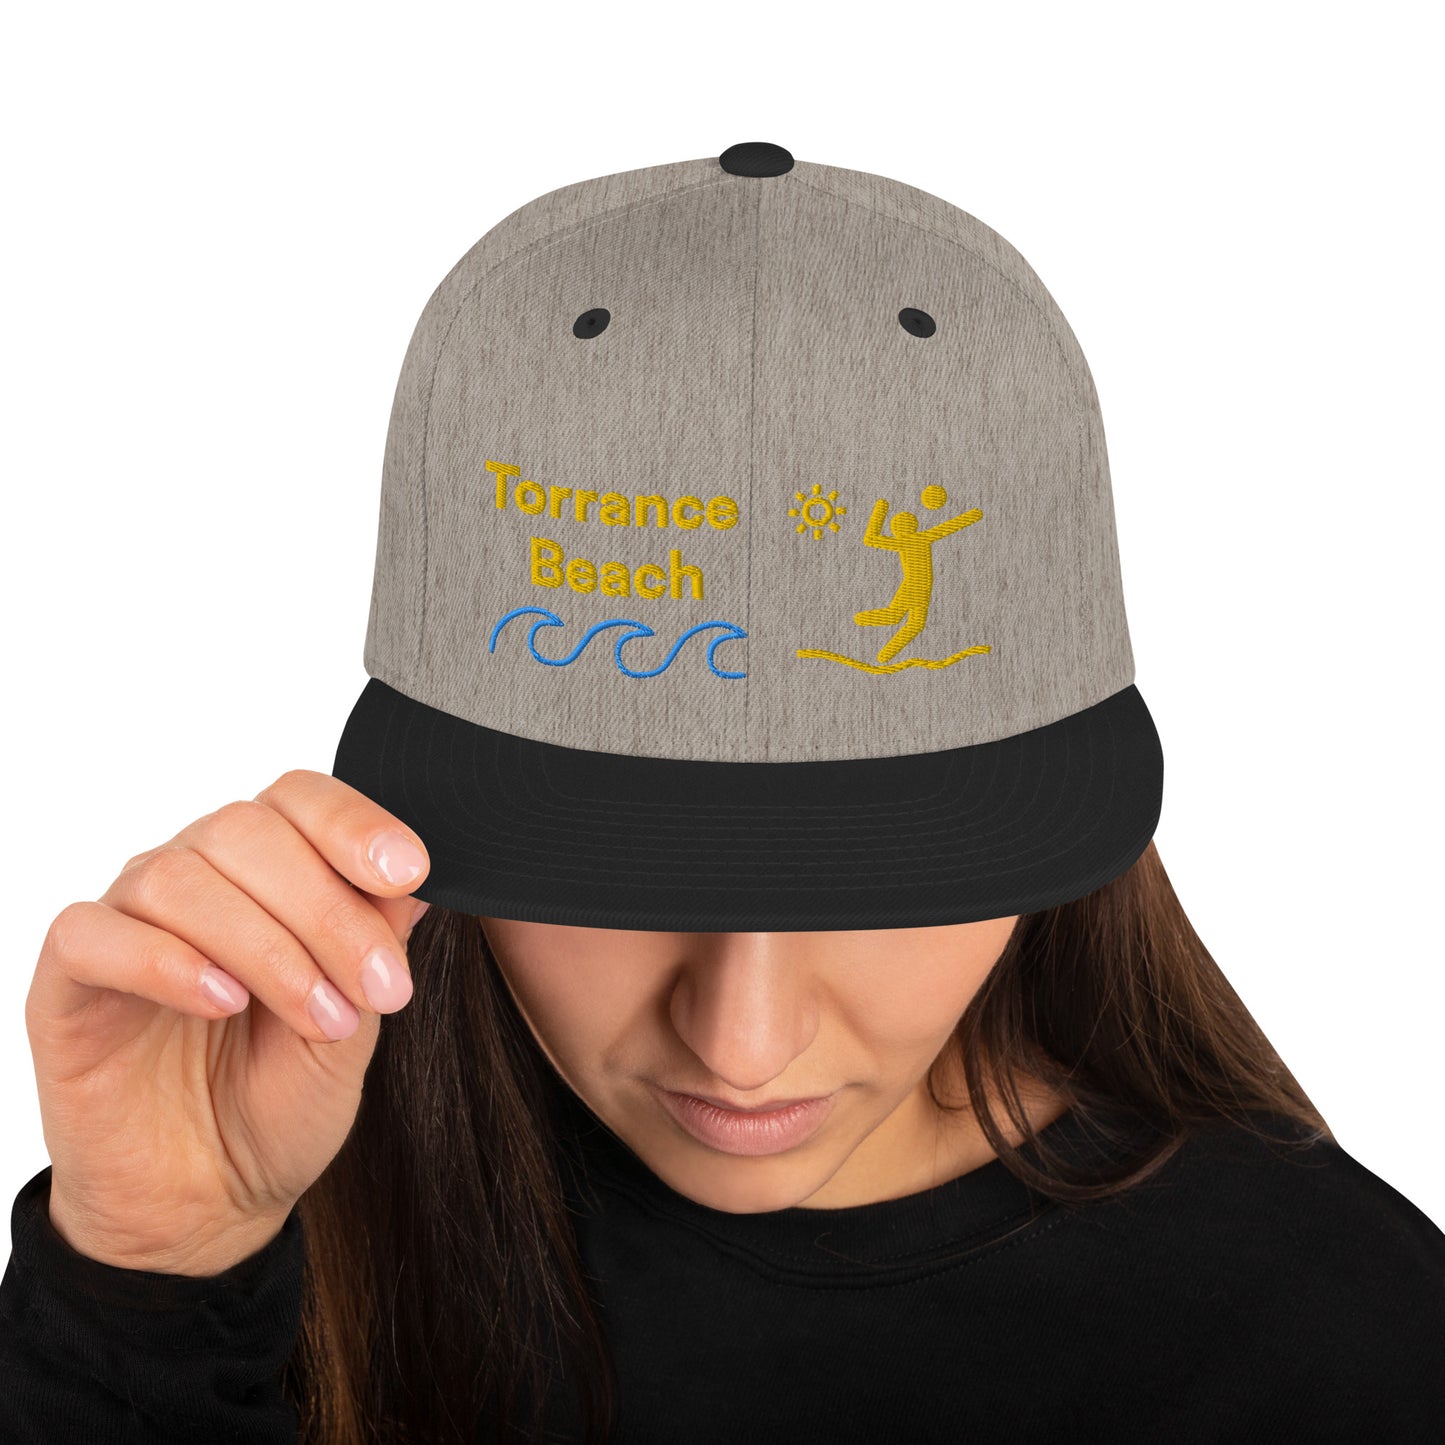 Torrance  Beach - California - South Bay - Snapback Hat - Volleyball Style